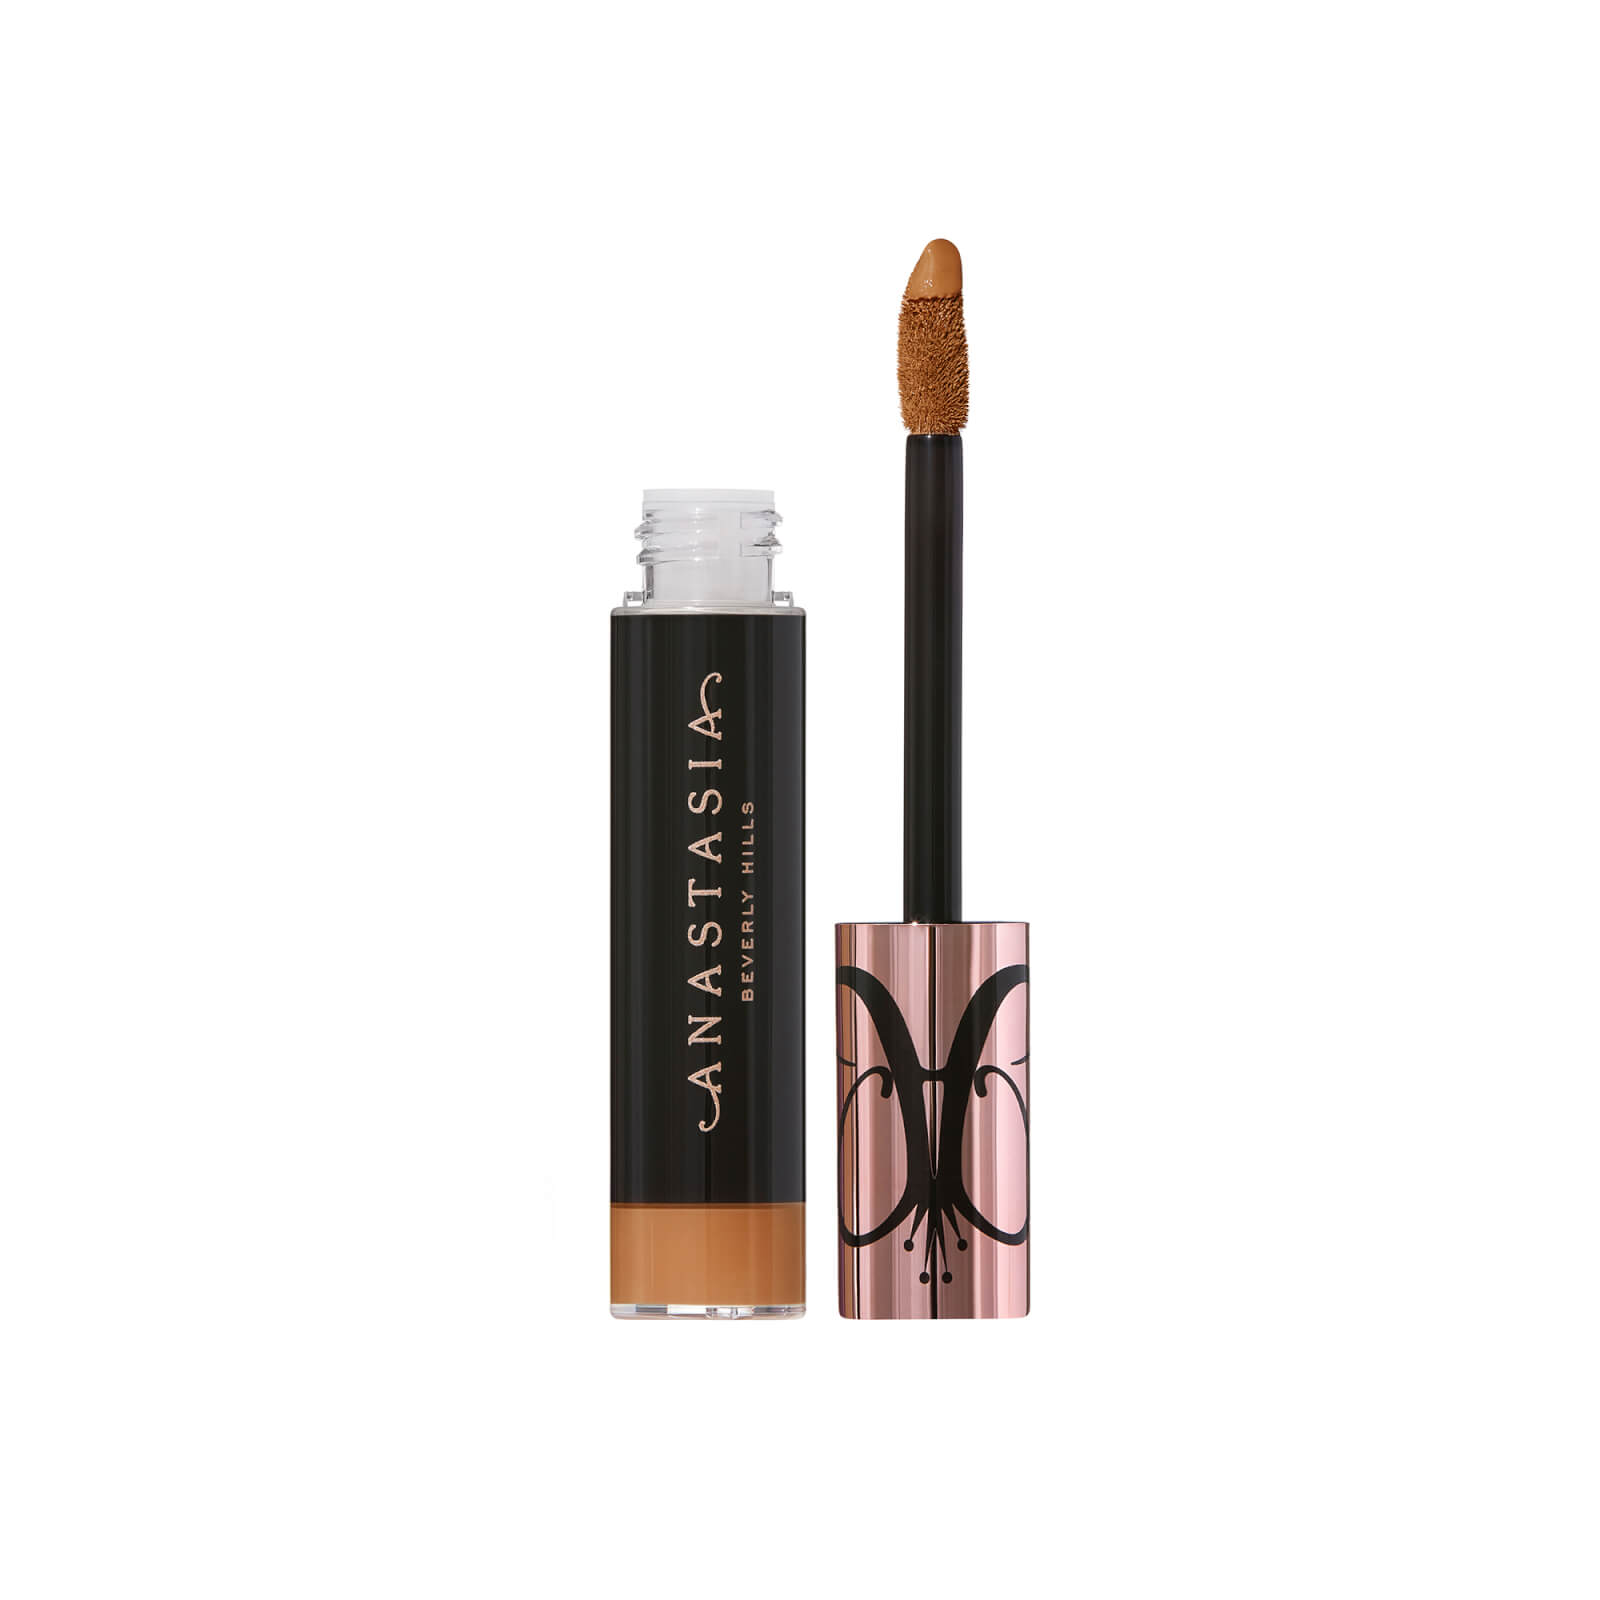 Anastasia Beverly Hills Magic Touch Concealer 12ml (Various Shades) - 23